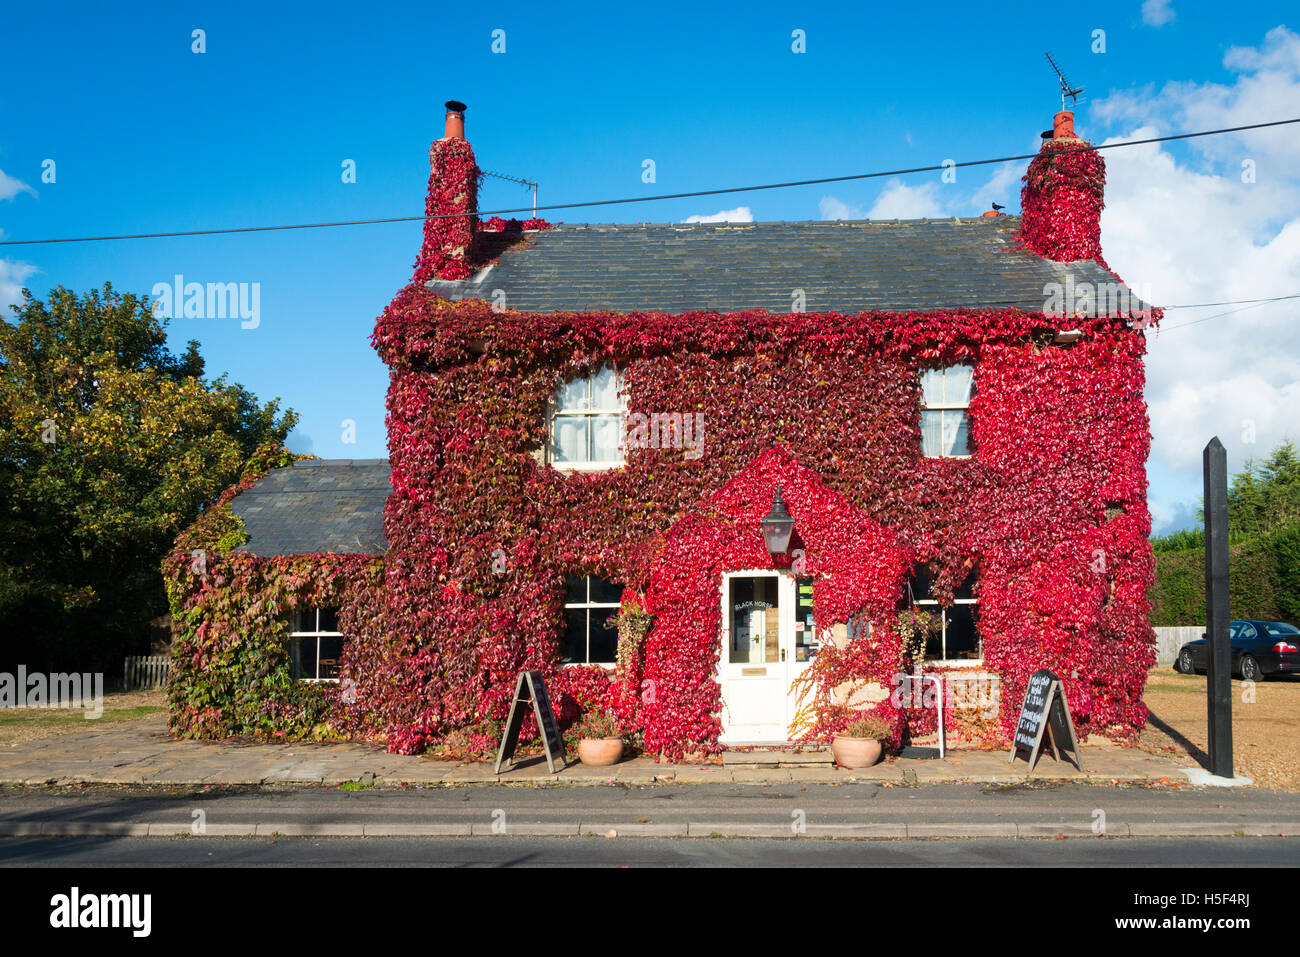 Rampton, Cambridgeshire, UK. 20th Oct, 2016. The Black Bull Pub is covered in glorious red Virginia Creeper plants and glows in the autumn sunshine. The weather is a mix of sunshine and showers in East Anglia and the leaves have turned deep red and form a spectacular display of autumn colour. Credit:  Julian Eales/Alamy Live News Stock Photo